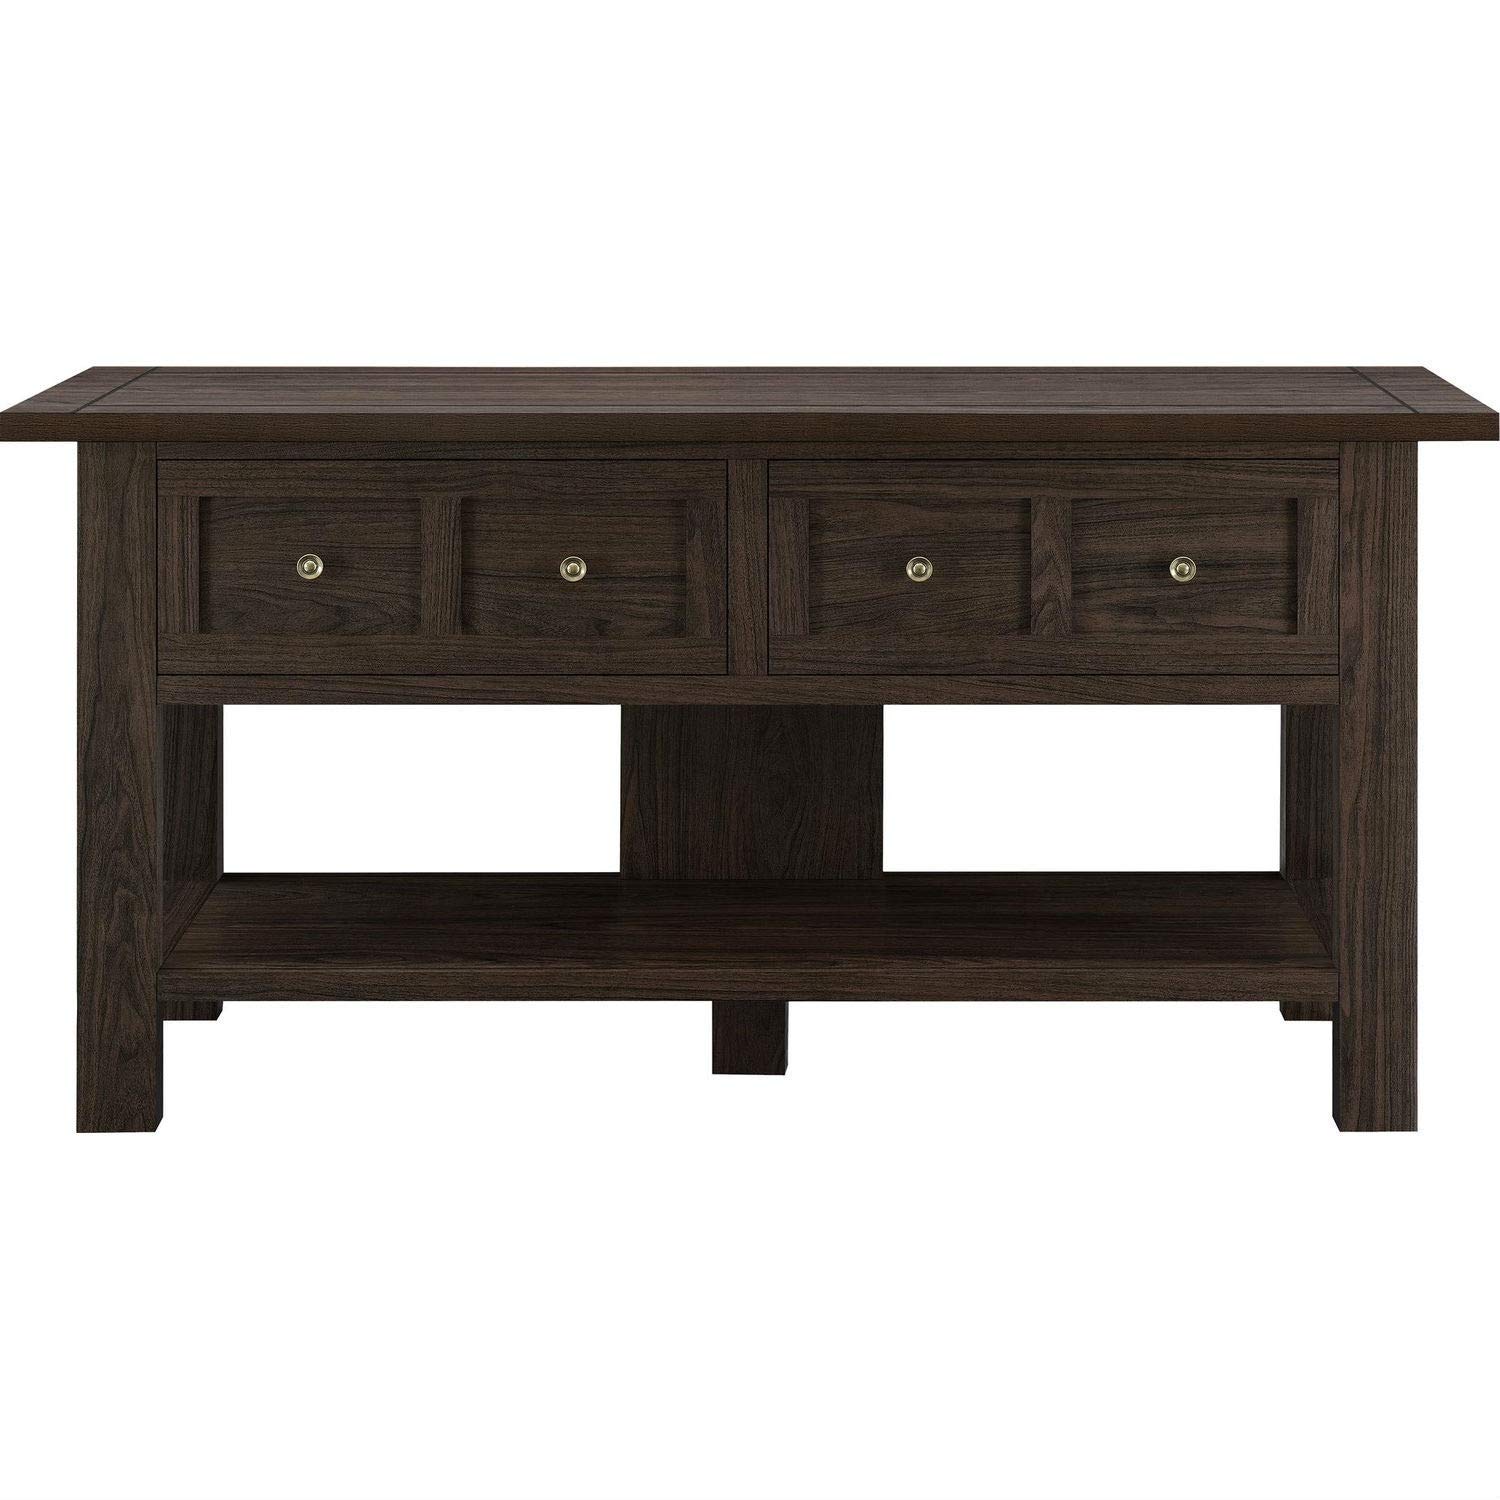 storage accent table find line stratford wicker folding bronze get quotations trustpurchase classic inch stand versatile console with drawers hallway chest furniture large trunk